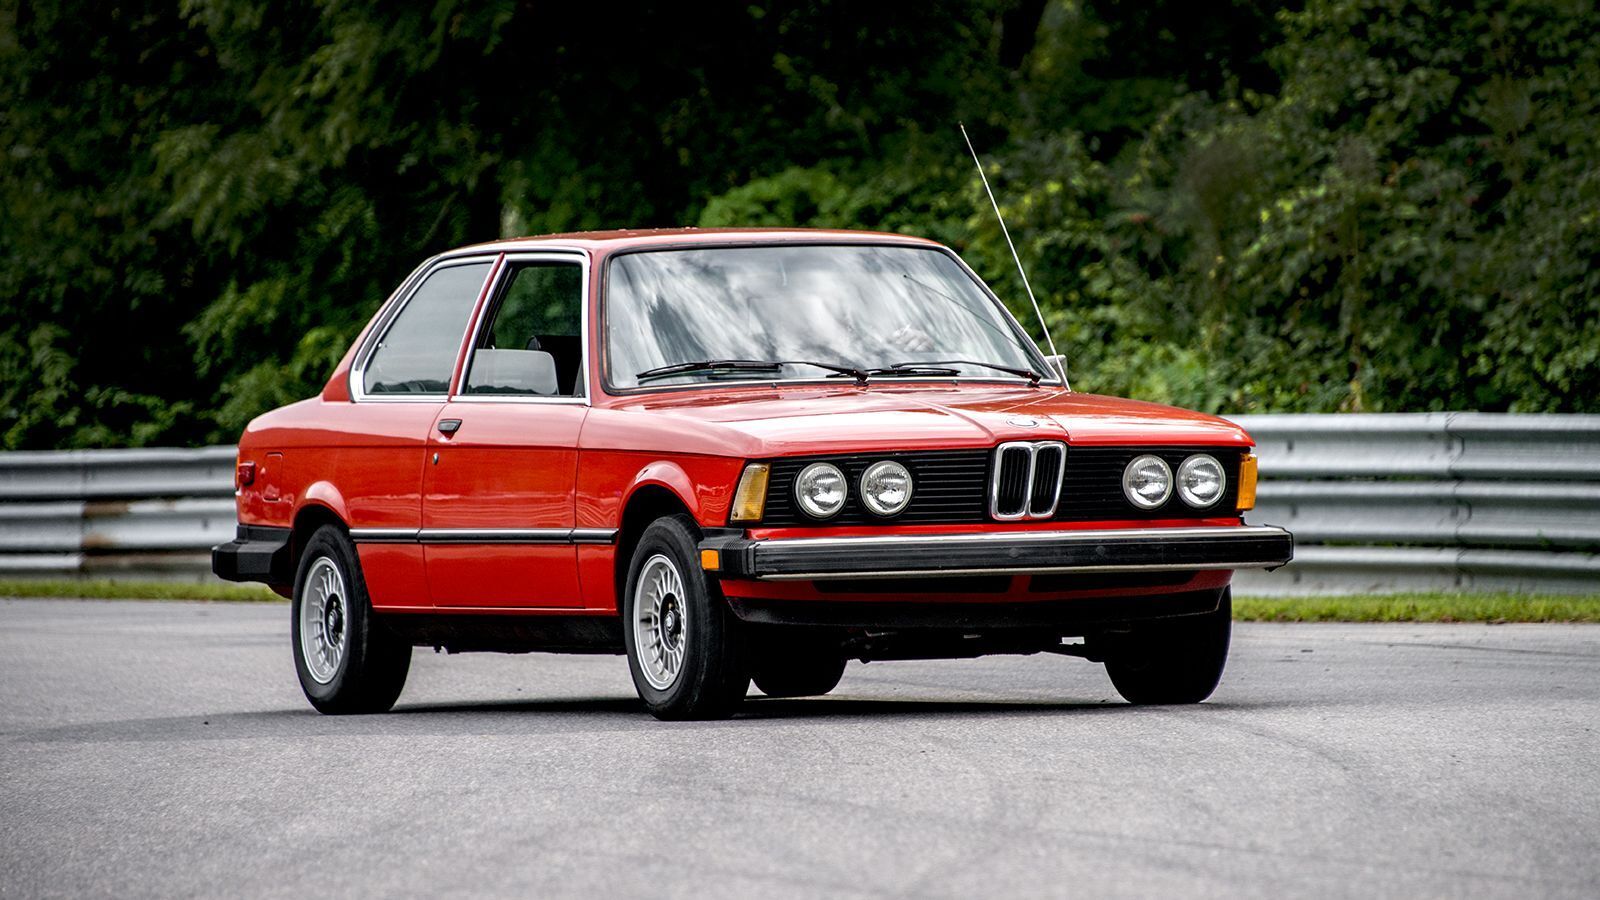 The best classic car of all time has been named: what makes it special